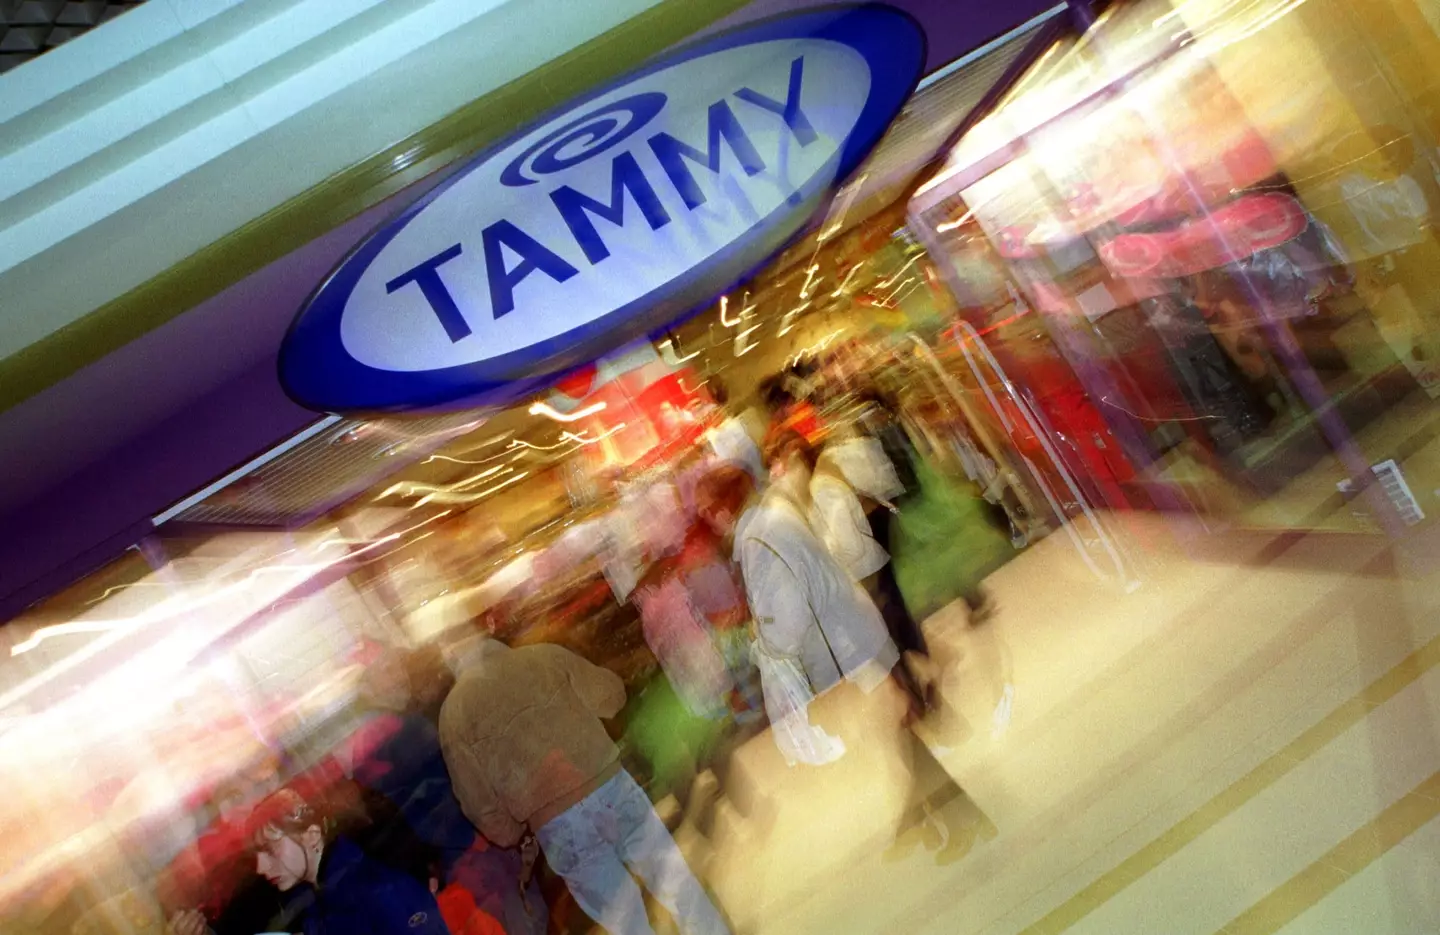 Tammy Girl is back after the brand closed in 2005.